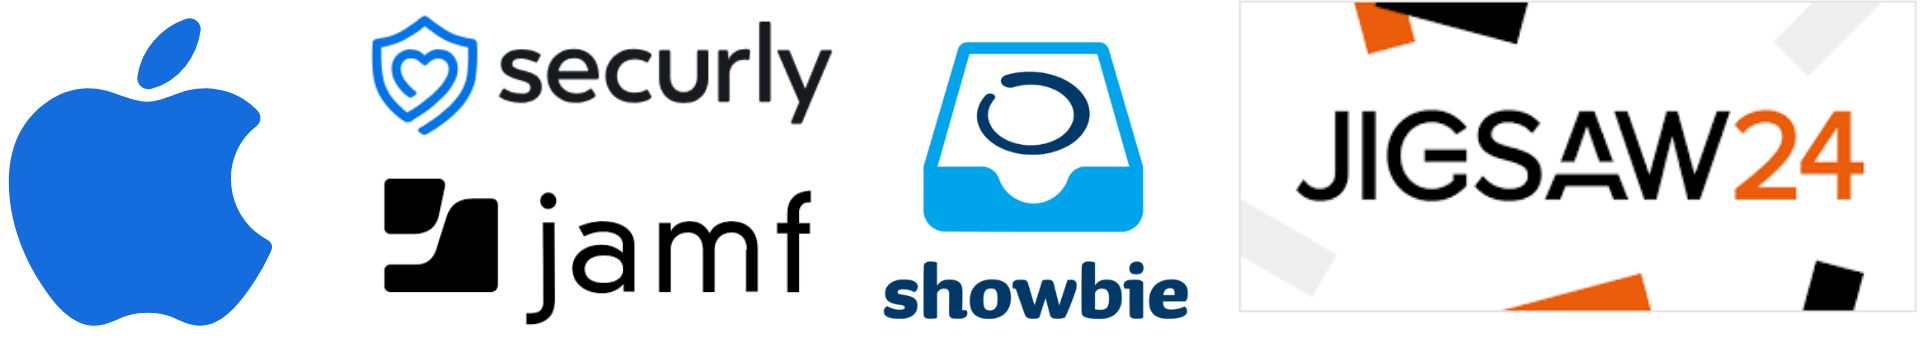 Logos from showbie jigsaw securly jamf and apple